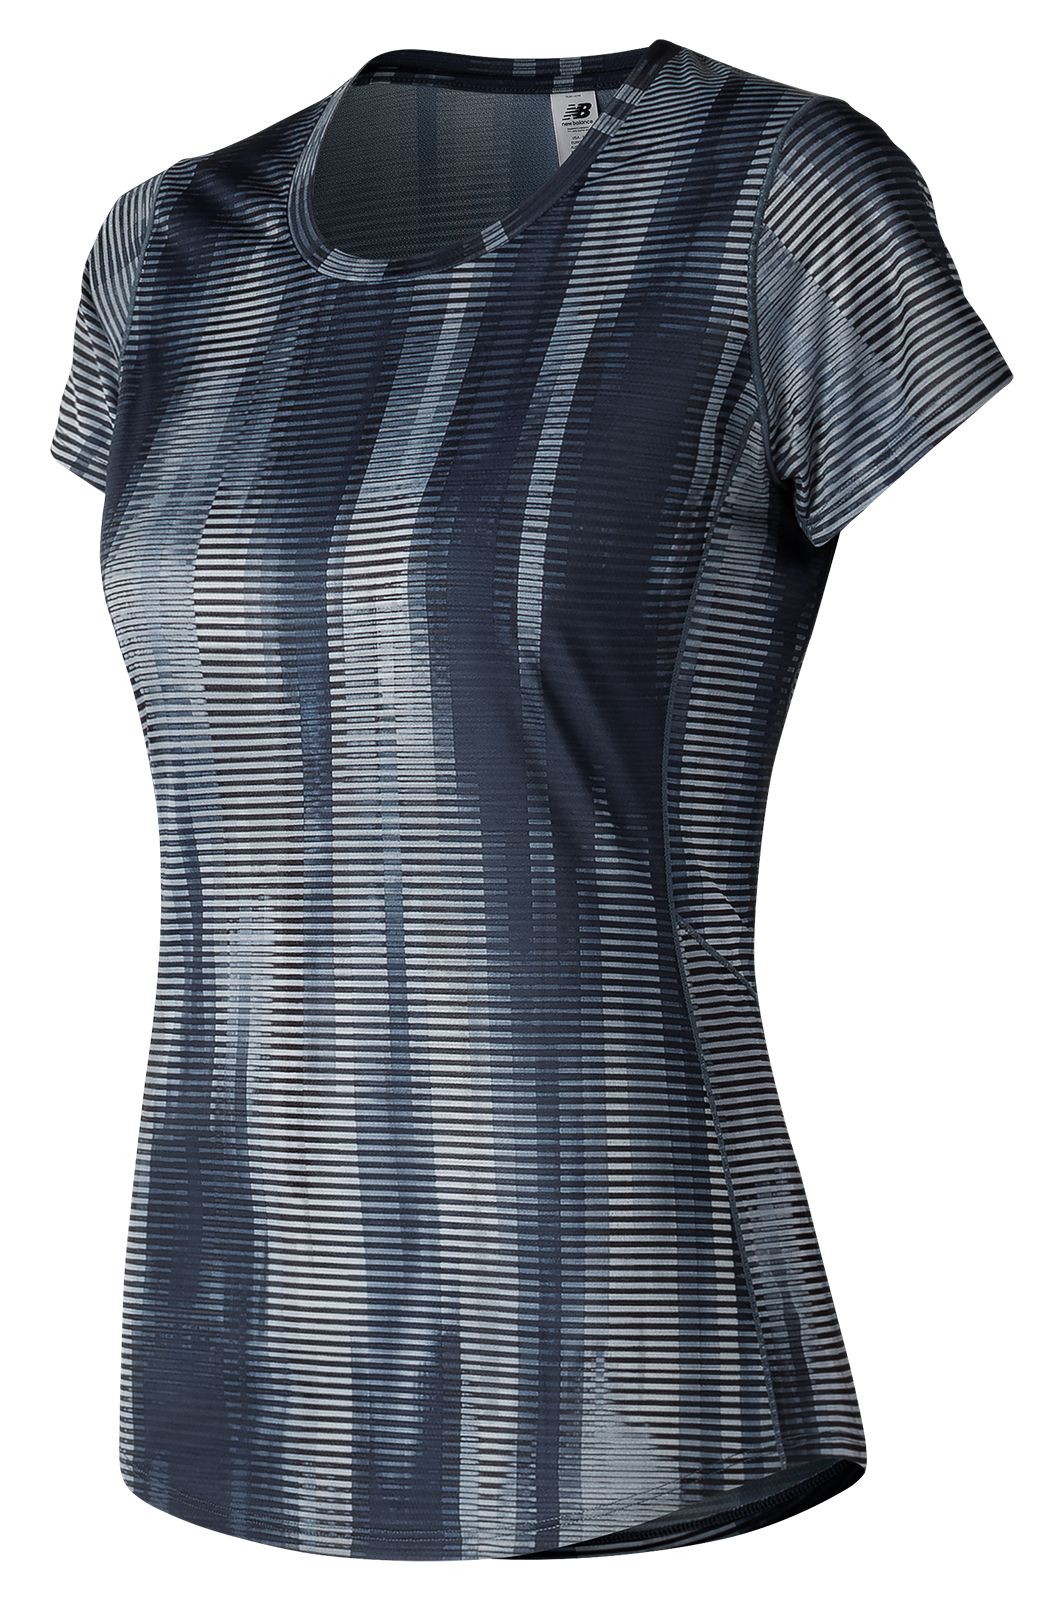 Accelerate Printed Short Sleeve - Women's 73129 - Tops, Performance ...